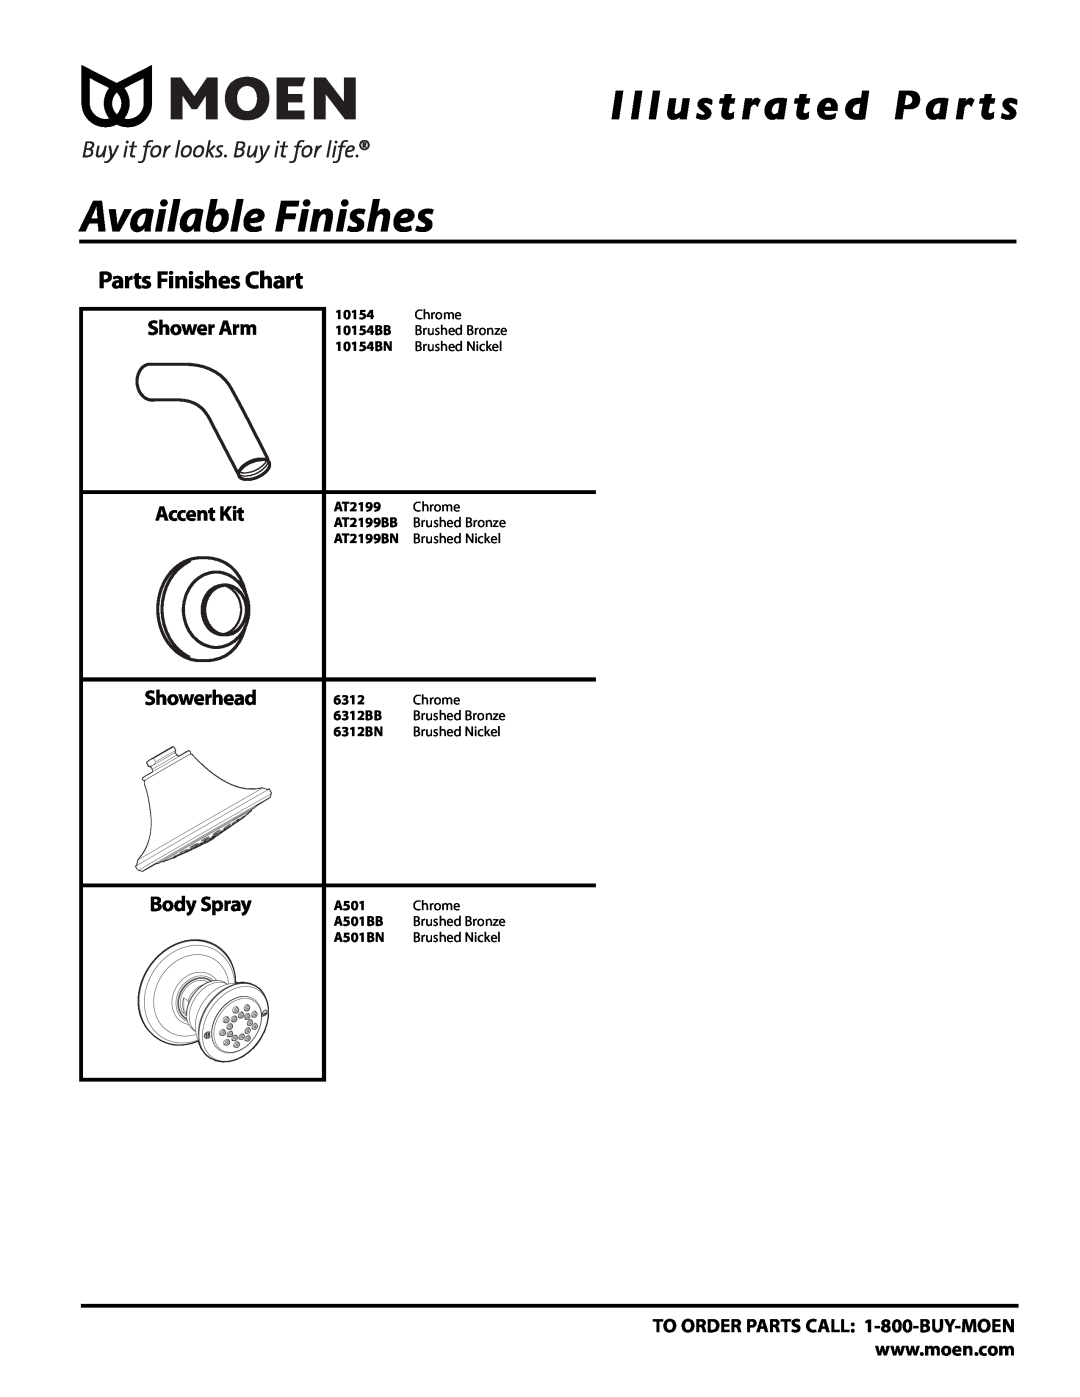 Moen T4112BB Shower Arm, Accent Kit, Showerhead, Body Spray, Available Finishes, Illustrated Par ts, Parts Finishes Chart 